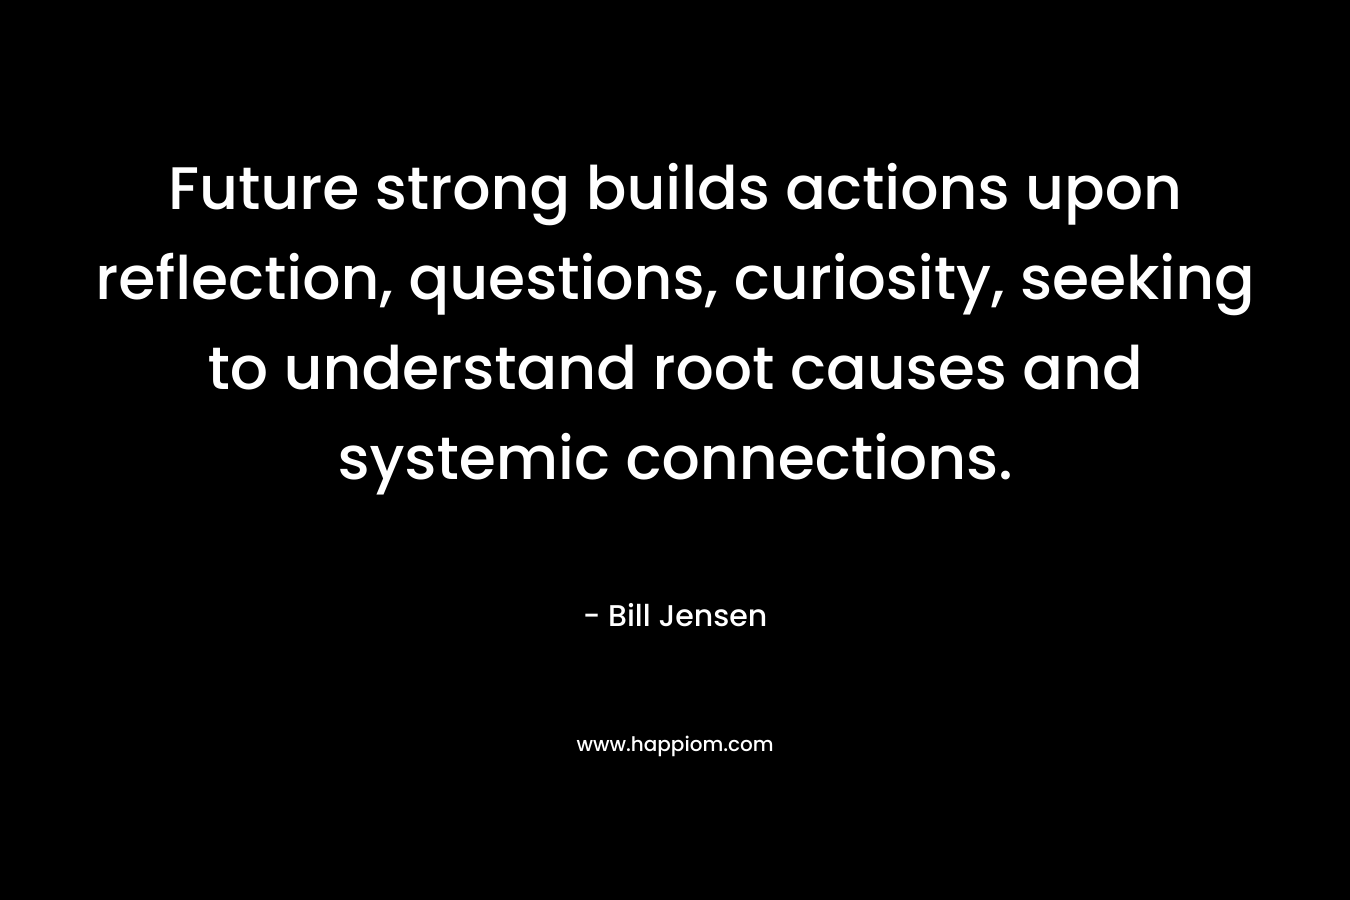 Future strong builds actions upon reflection, questions, curiosity, seeking to understand root causes and systemic connections.